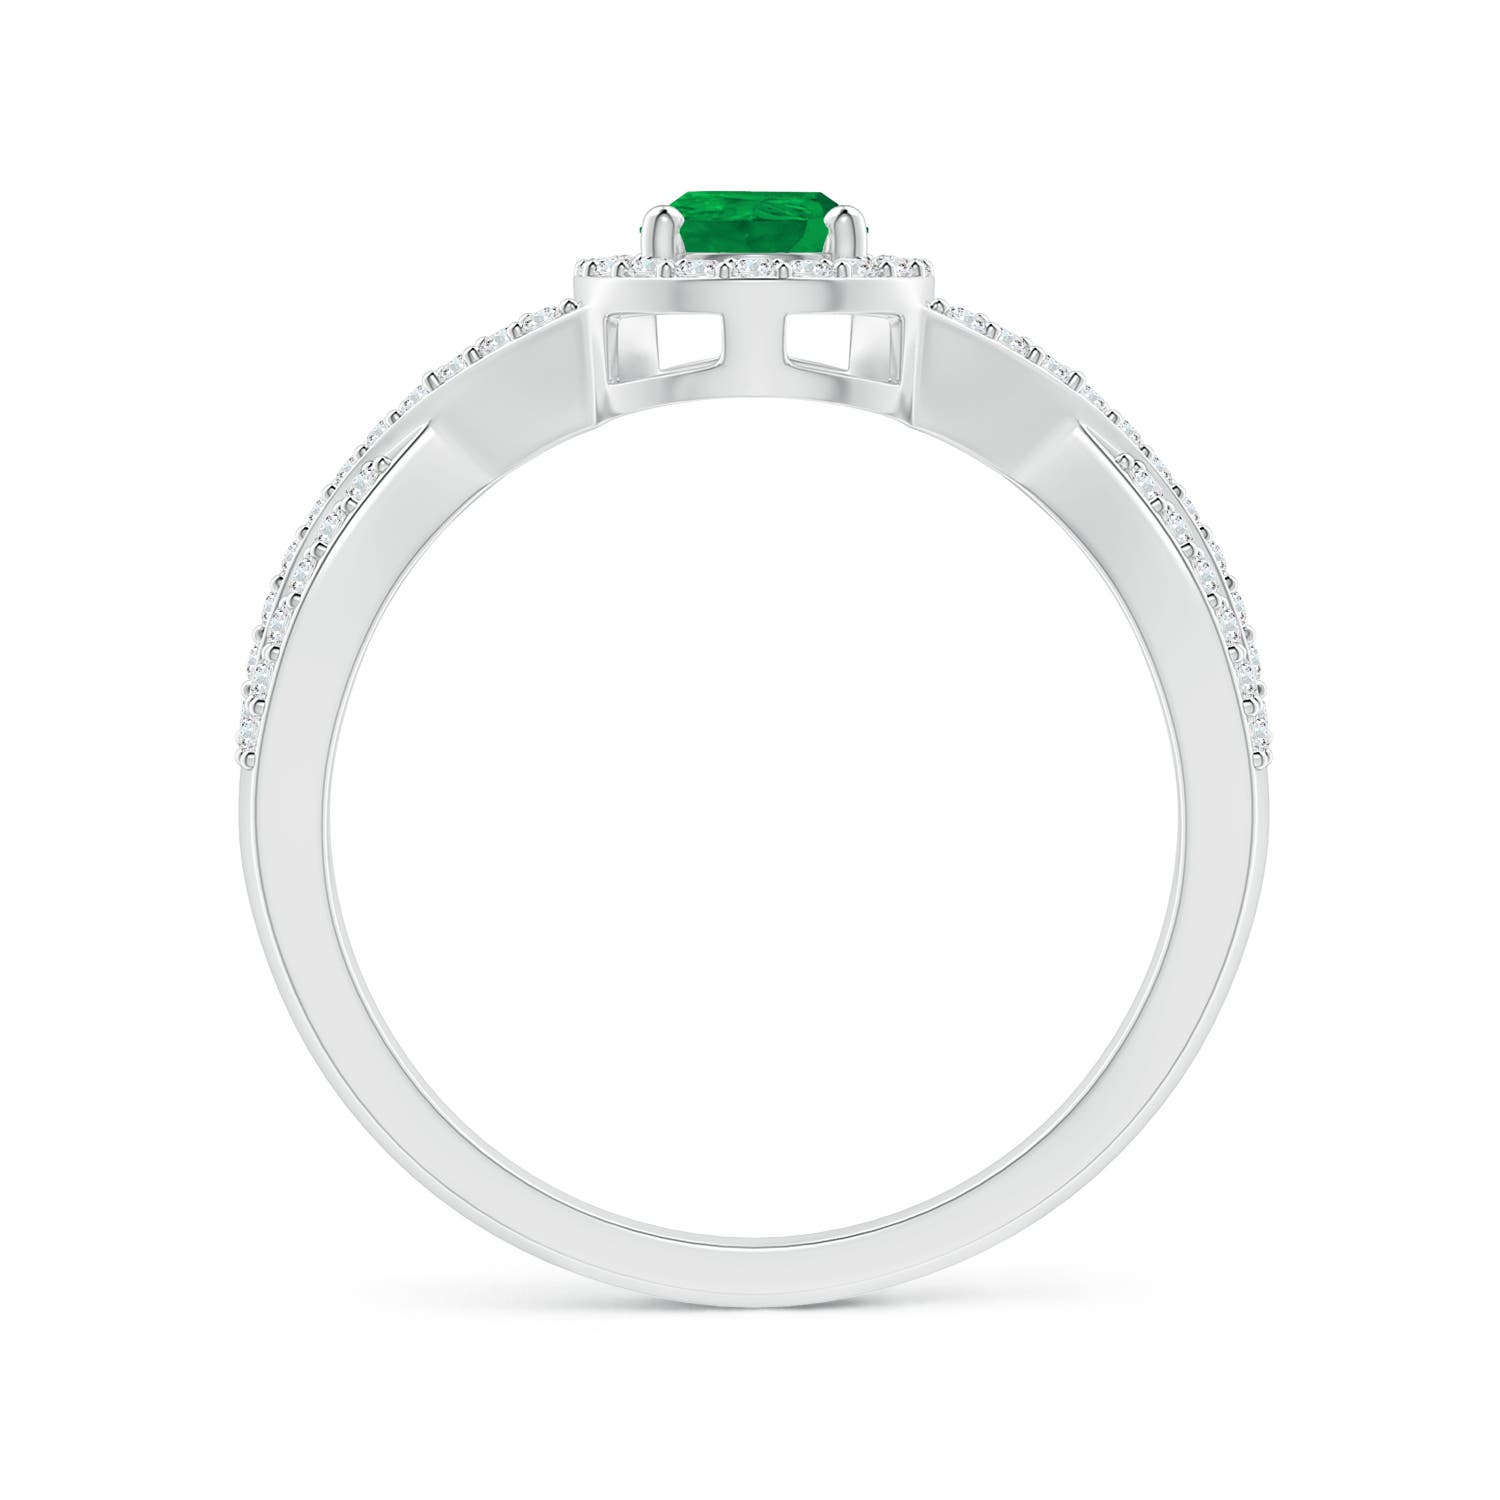 AA - Emerald / 0.65 CT / 14 KT White Gold